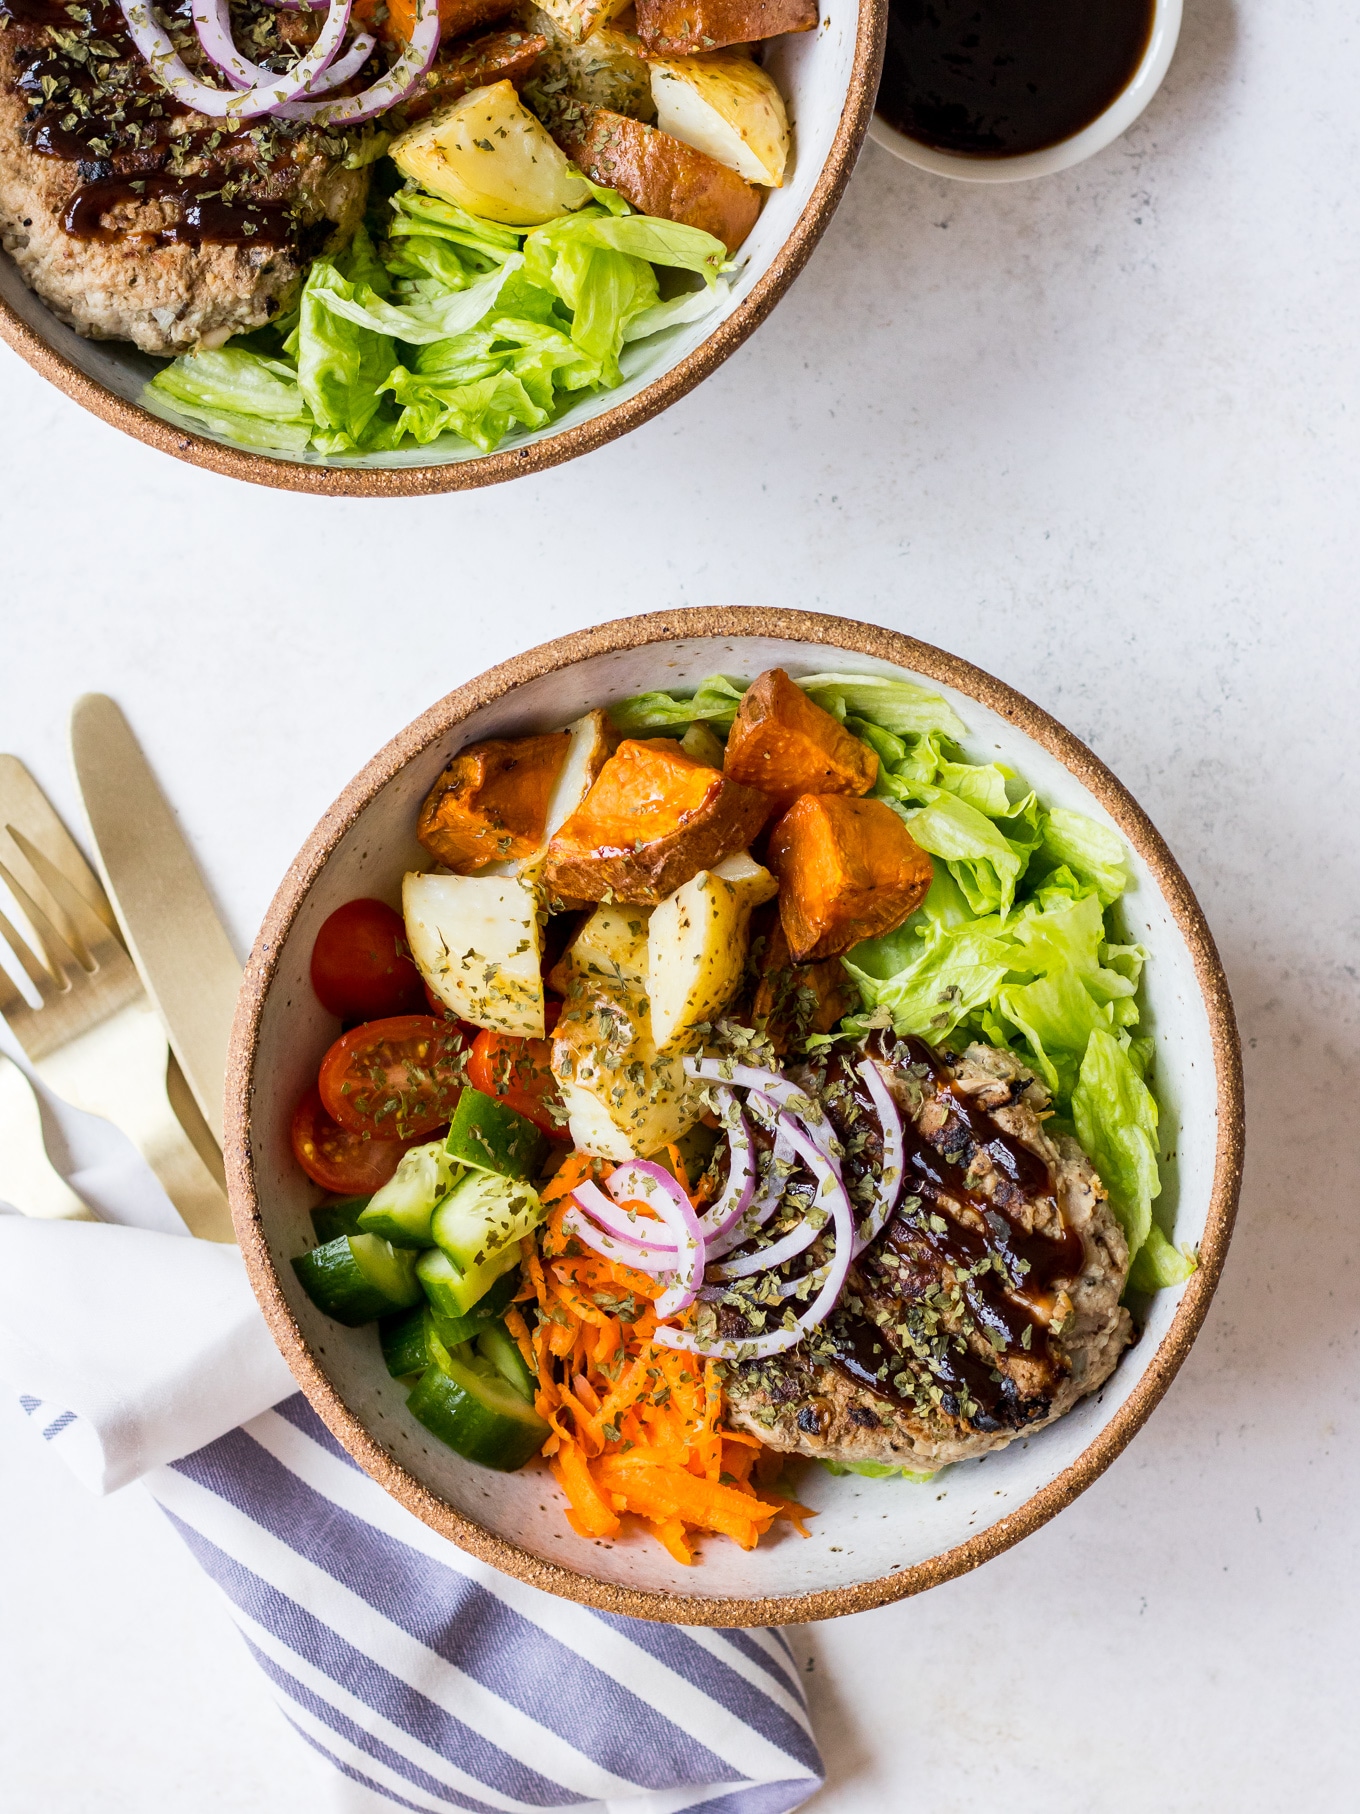 Turkey burger patty in a bowl with salad